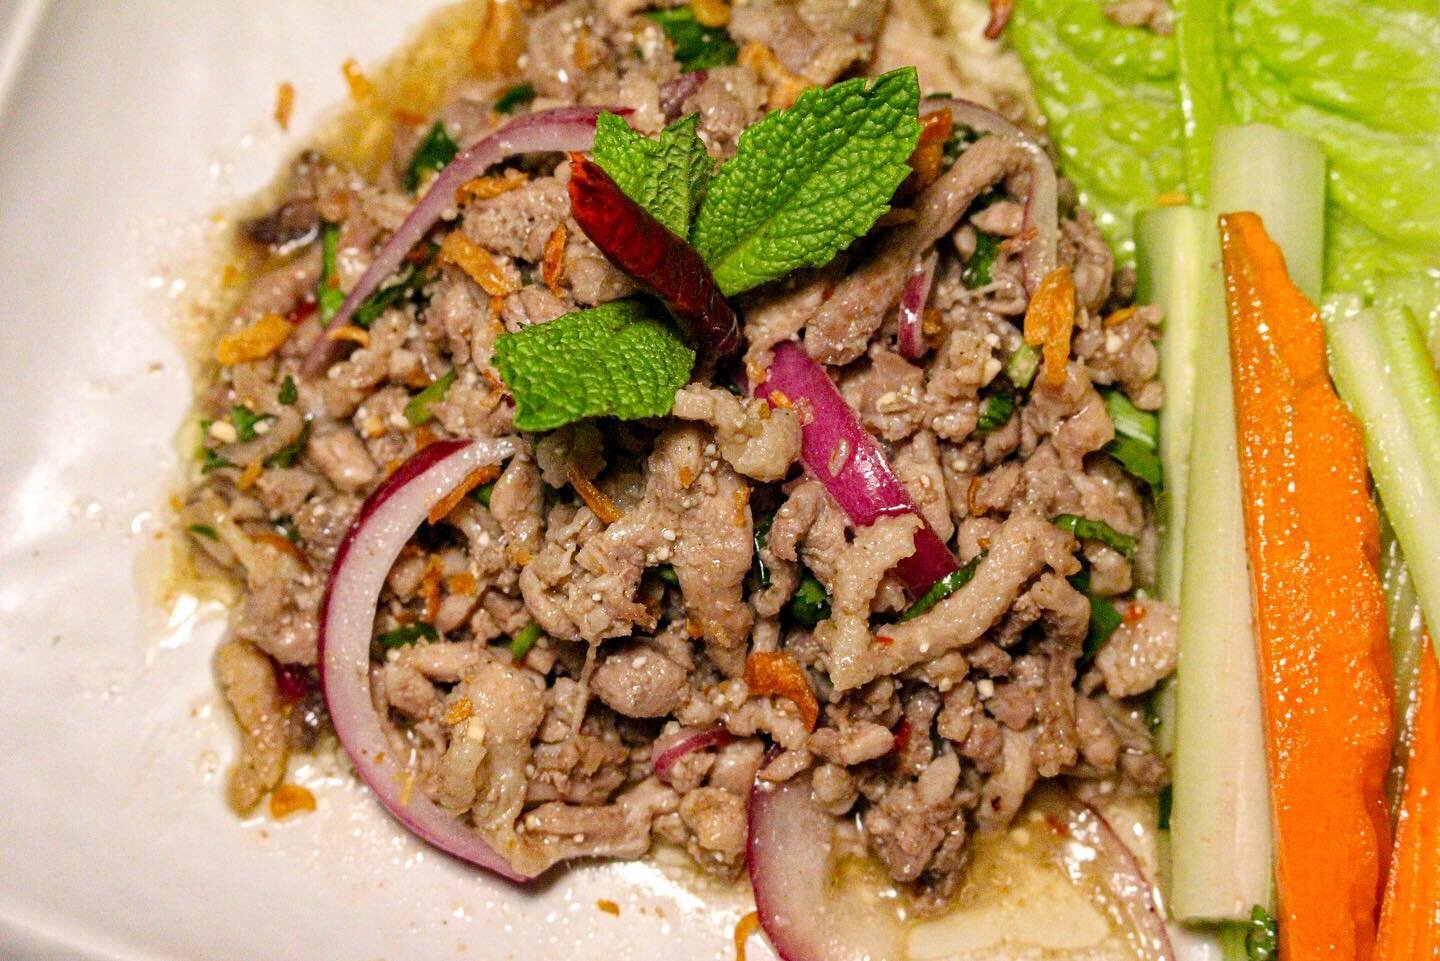 Presenting Laab Duck (duck salad); a part of our special seasonal menu ❄️. 

This delectable dish is flavored with fish sauce, lime juice, crushed red chilies, and toasted ground rice. 🦆

.
.
.
.
.
.
.

#bmorefood #fellspoint #baltimore #thaifood #t